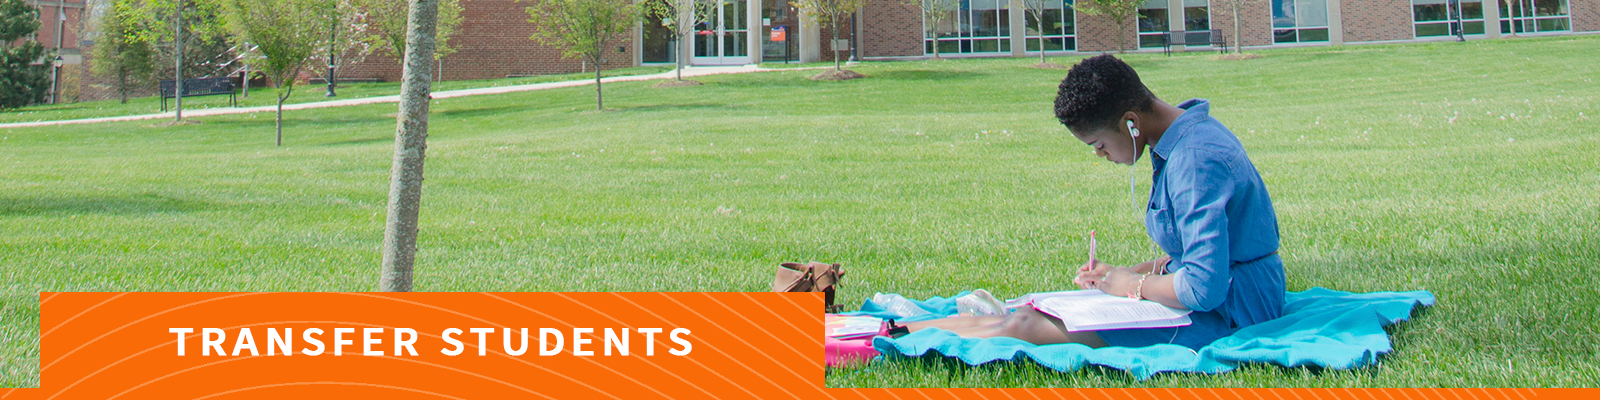 Student studying on blanket in grass area on campus